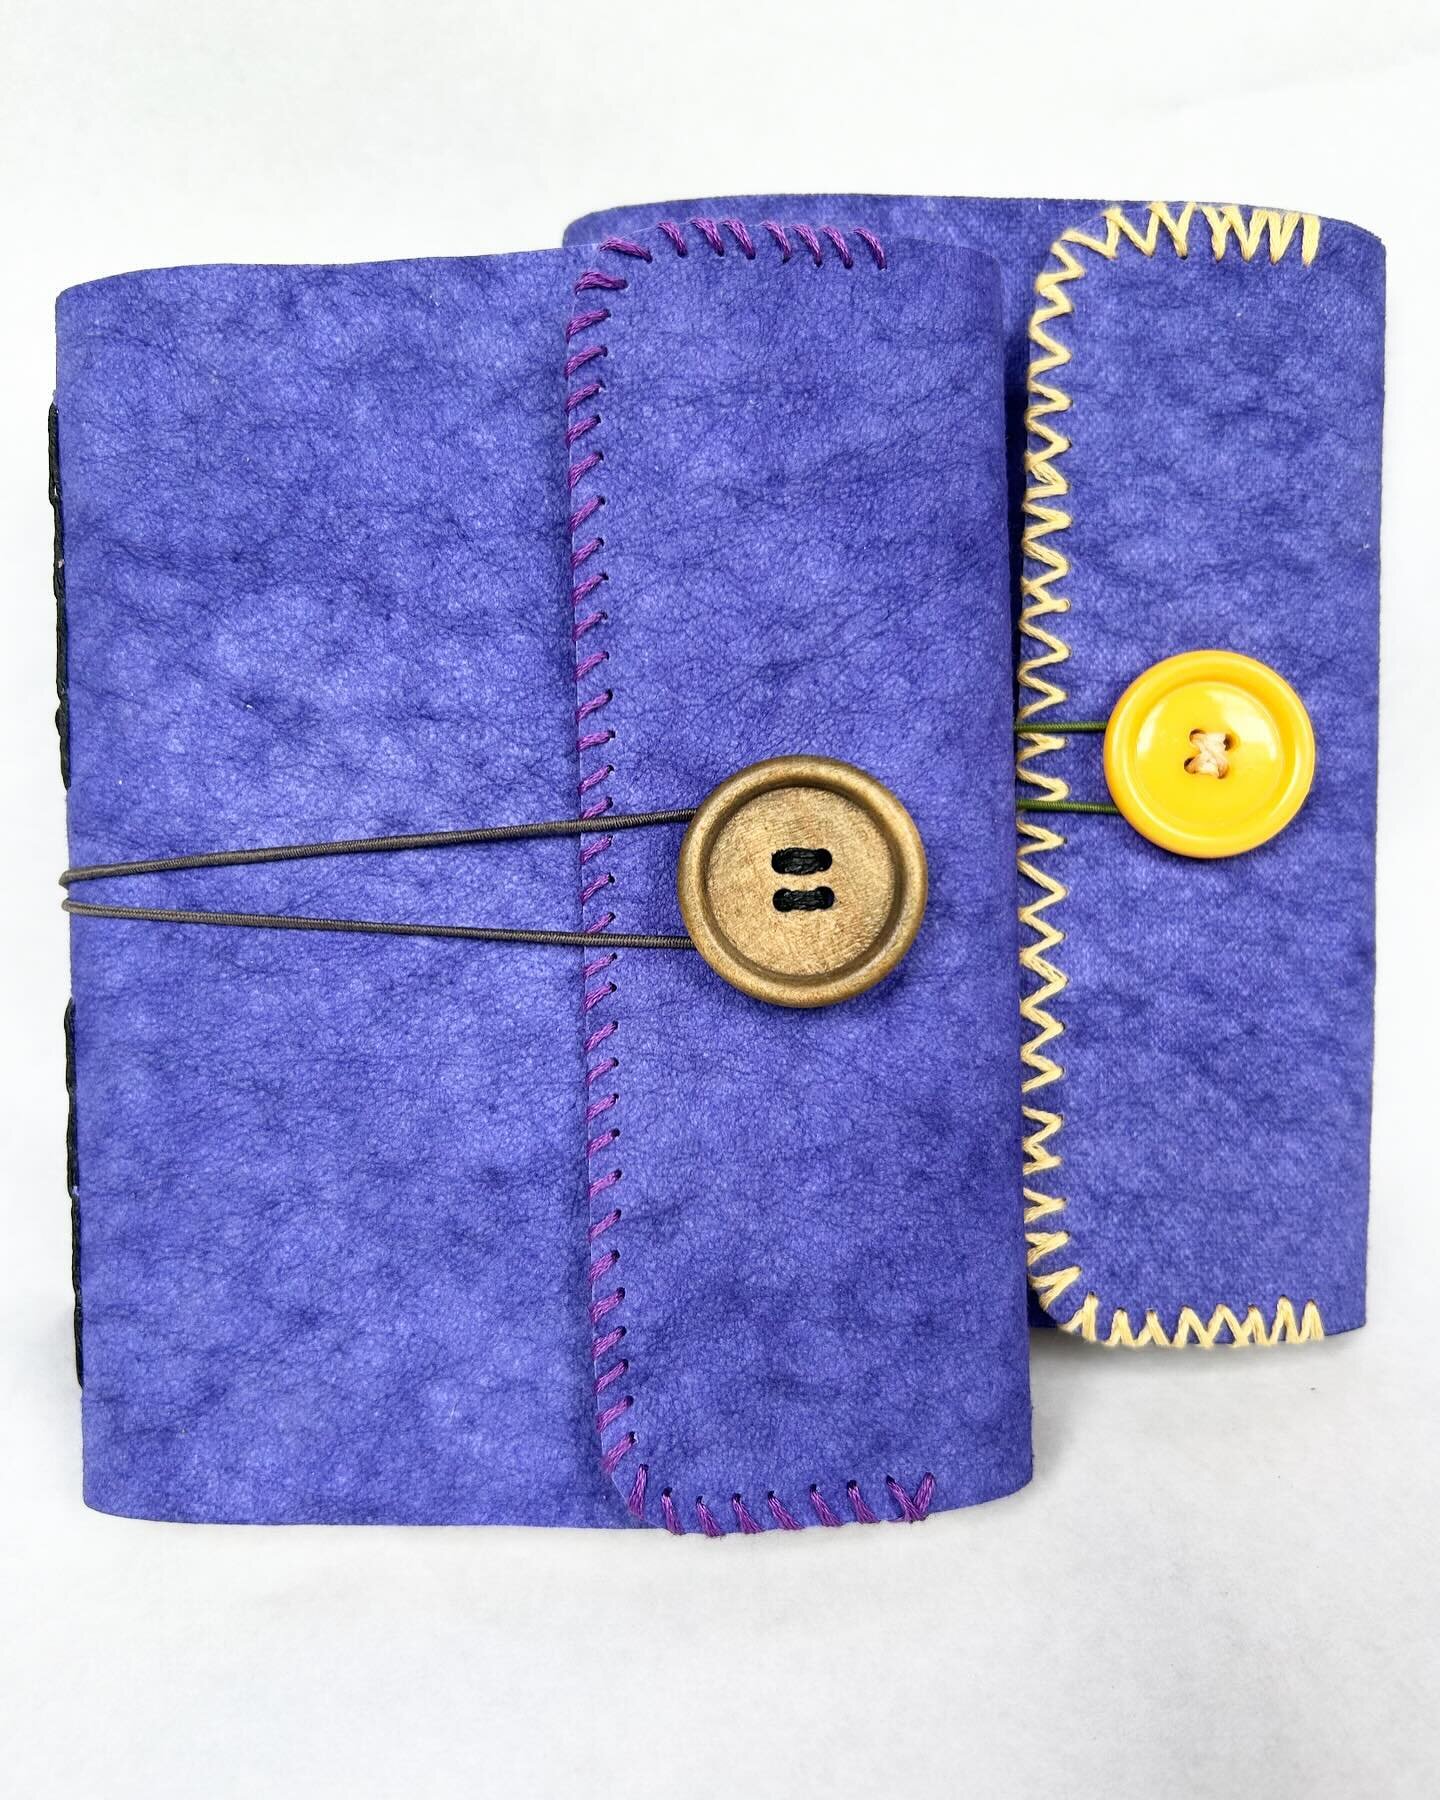 Two more journals. These have Kraft-tex (paper leather) covers, chainlink binding, vintage button closures and some decorative stitching. Each has four signatures (96 pages) of 80-pound sulfite paper wrapped in handmade paper with embedded botanicals